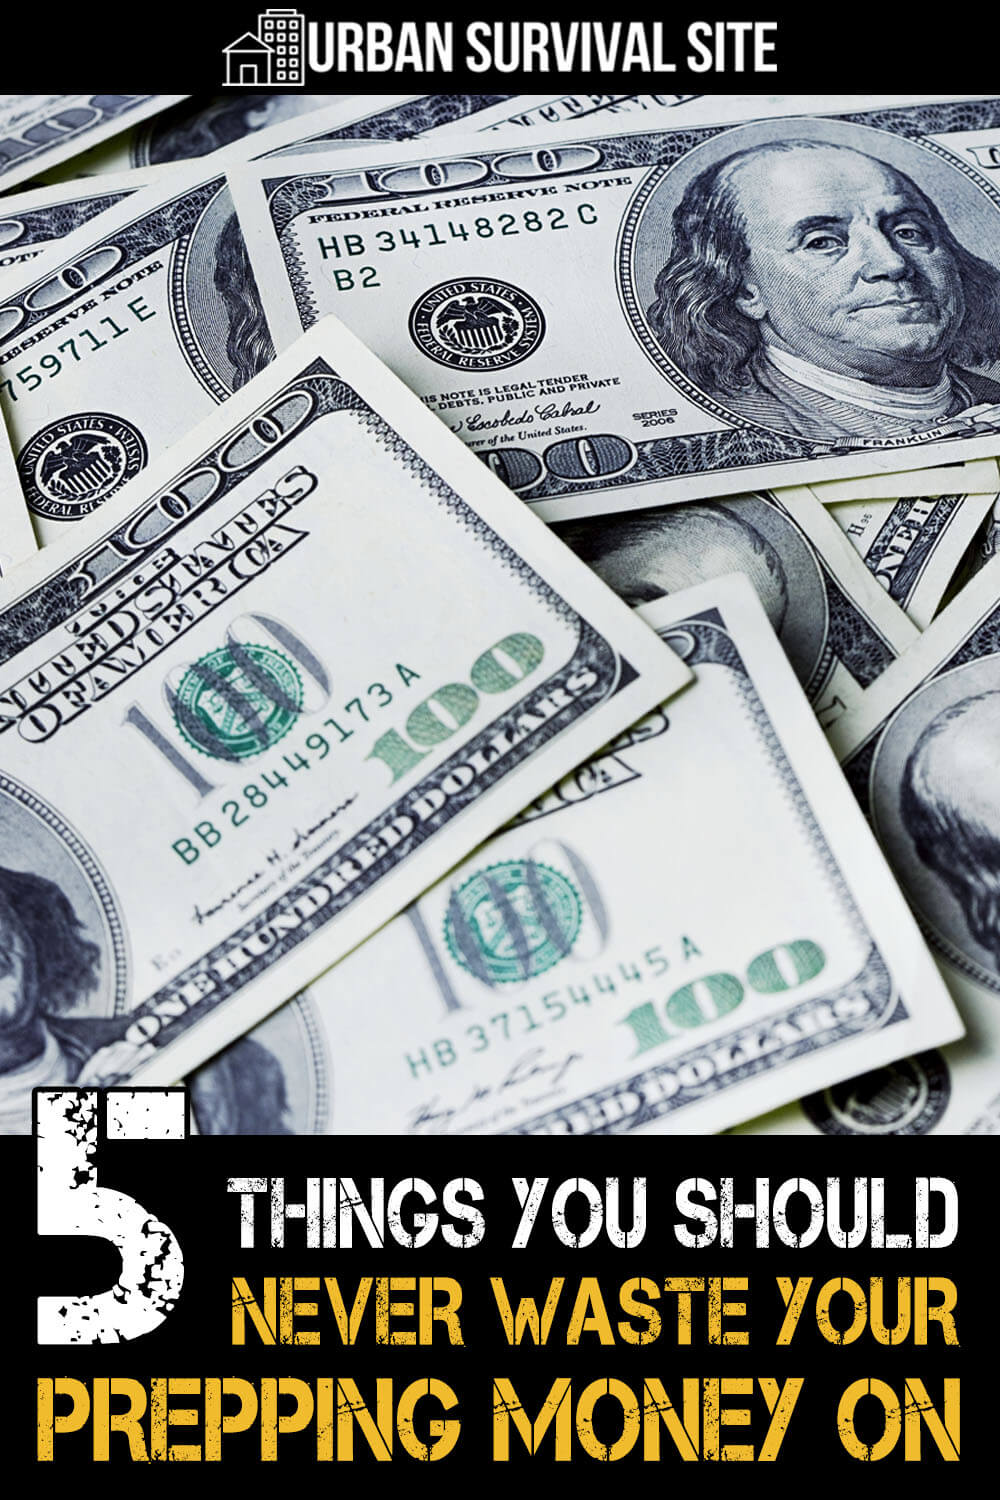 5 Things You Should Never Waste Your Prepping Money On